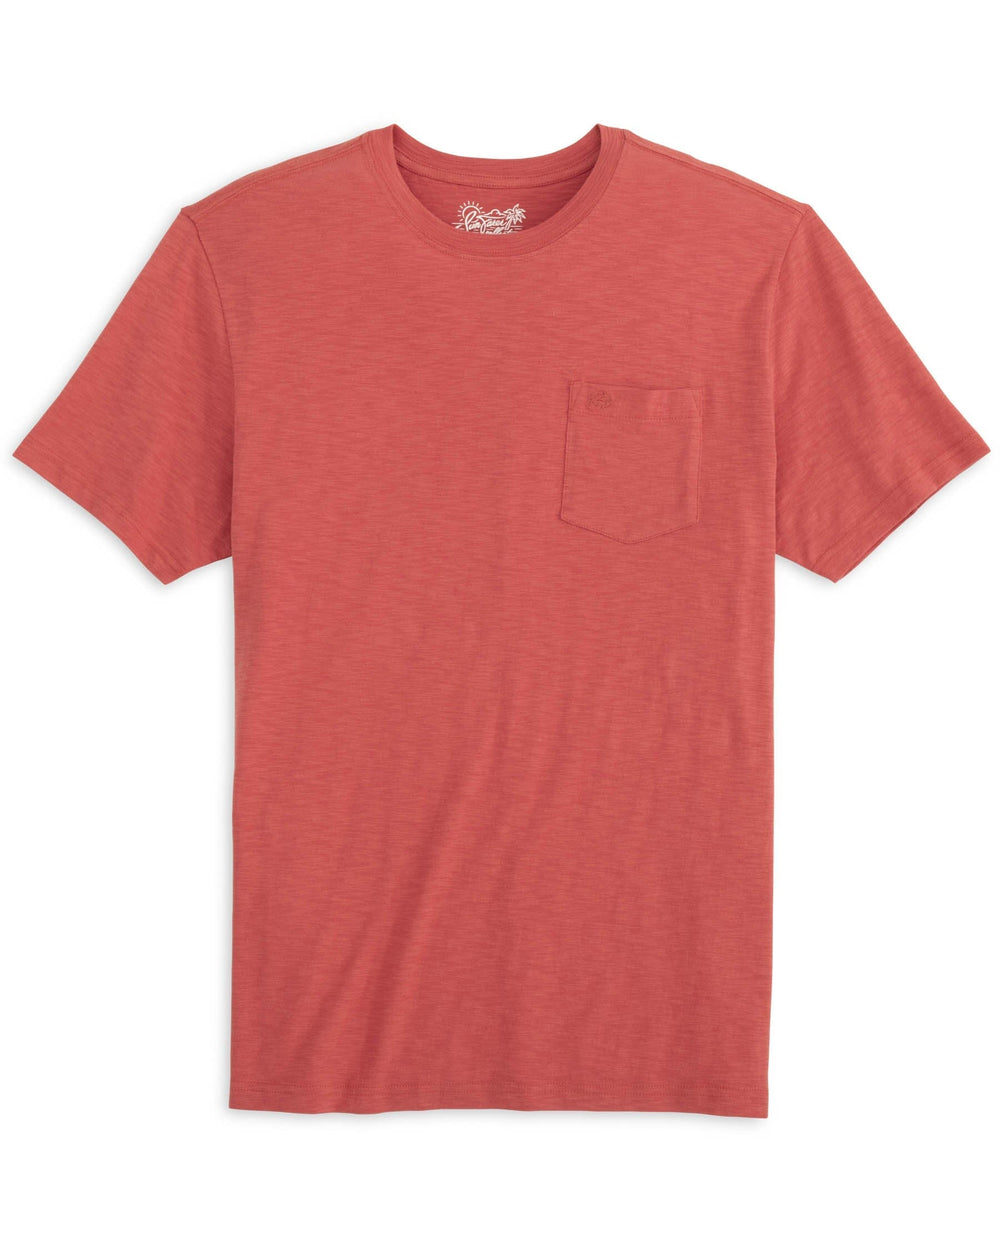 The front view of the Sun Farer T-Shirt by Southern Tide - Mineral Red